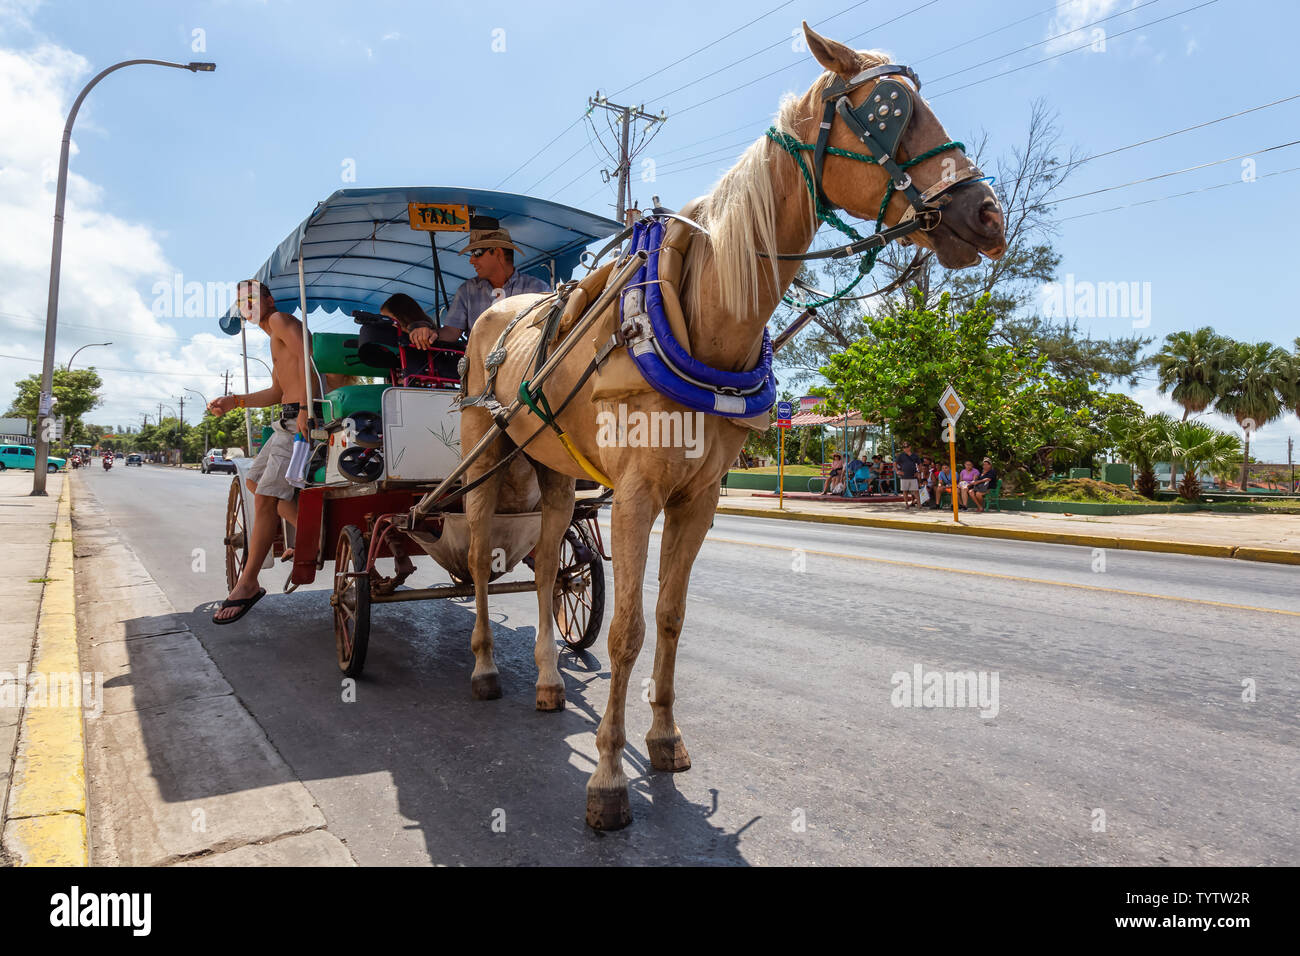 Varadero, Cuba - May 8, 2019: Horse Carriage Taxi Ride in the street during a vibrant and bright sunny day. Stock Photo